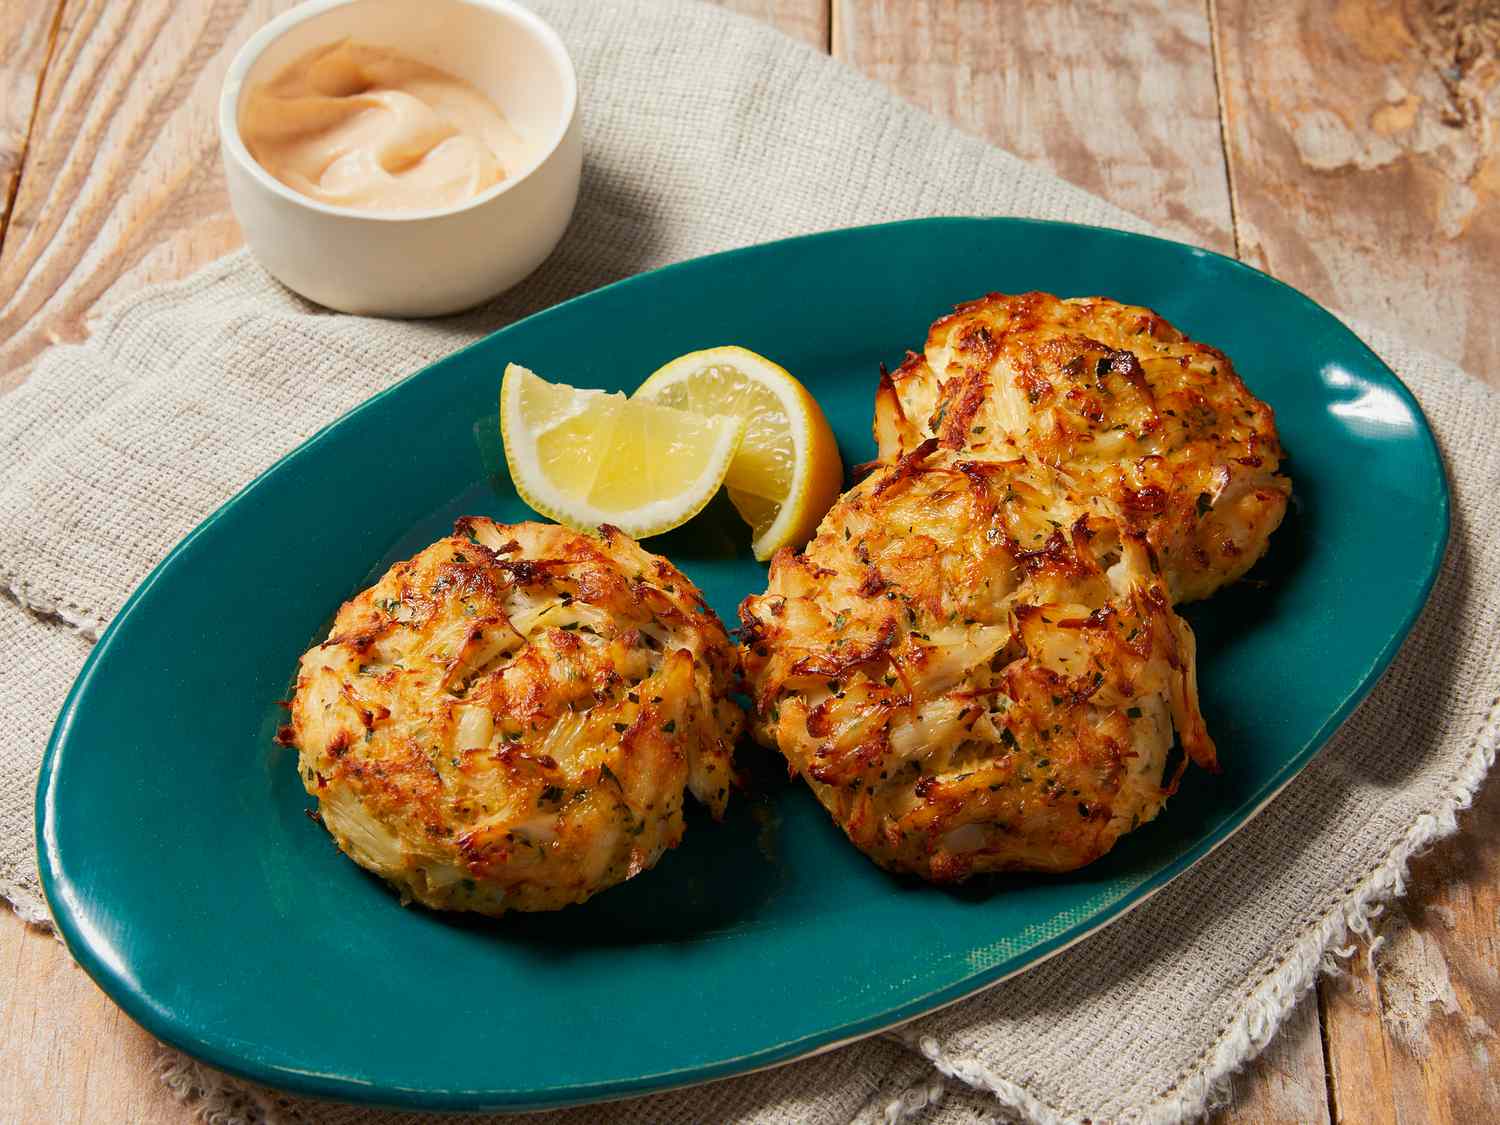 How To Broil Maryland Lump Crab Cakes